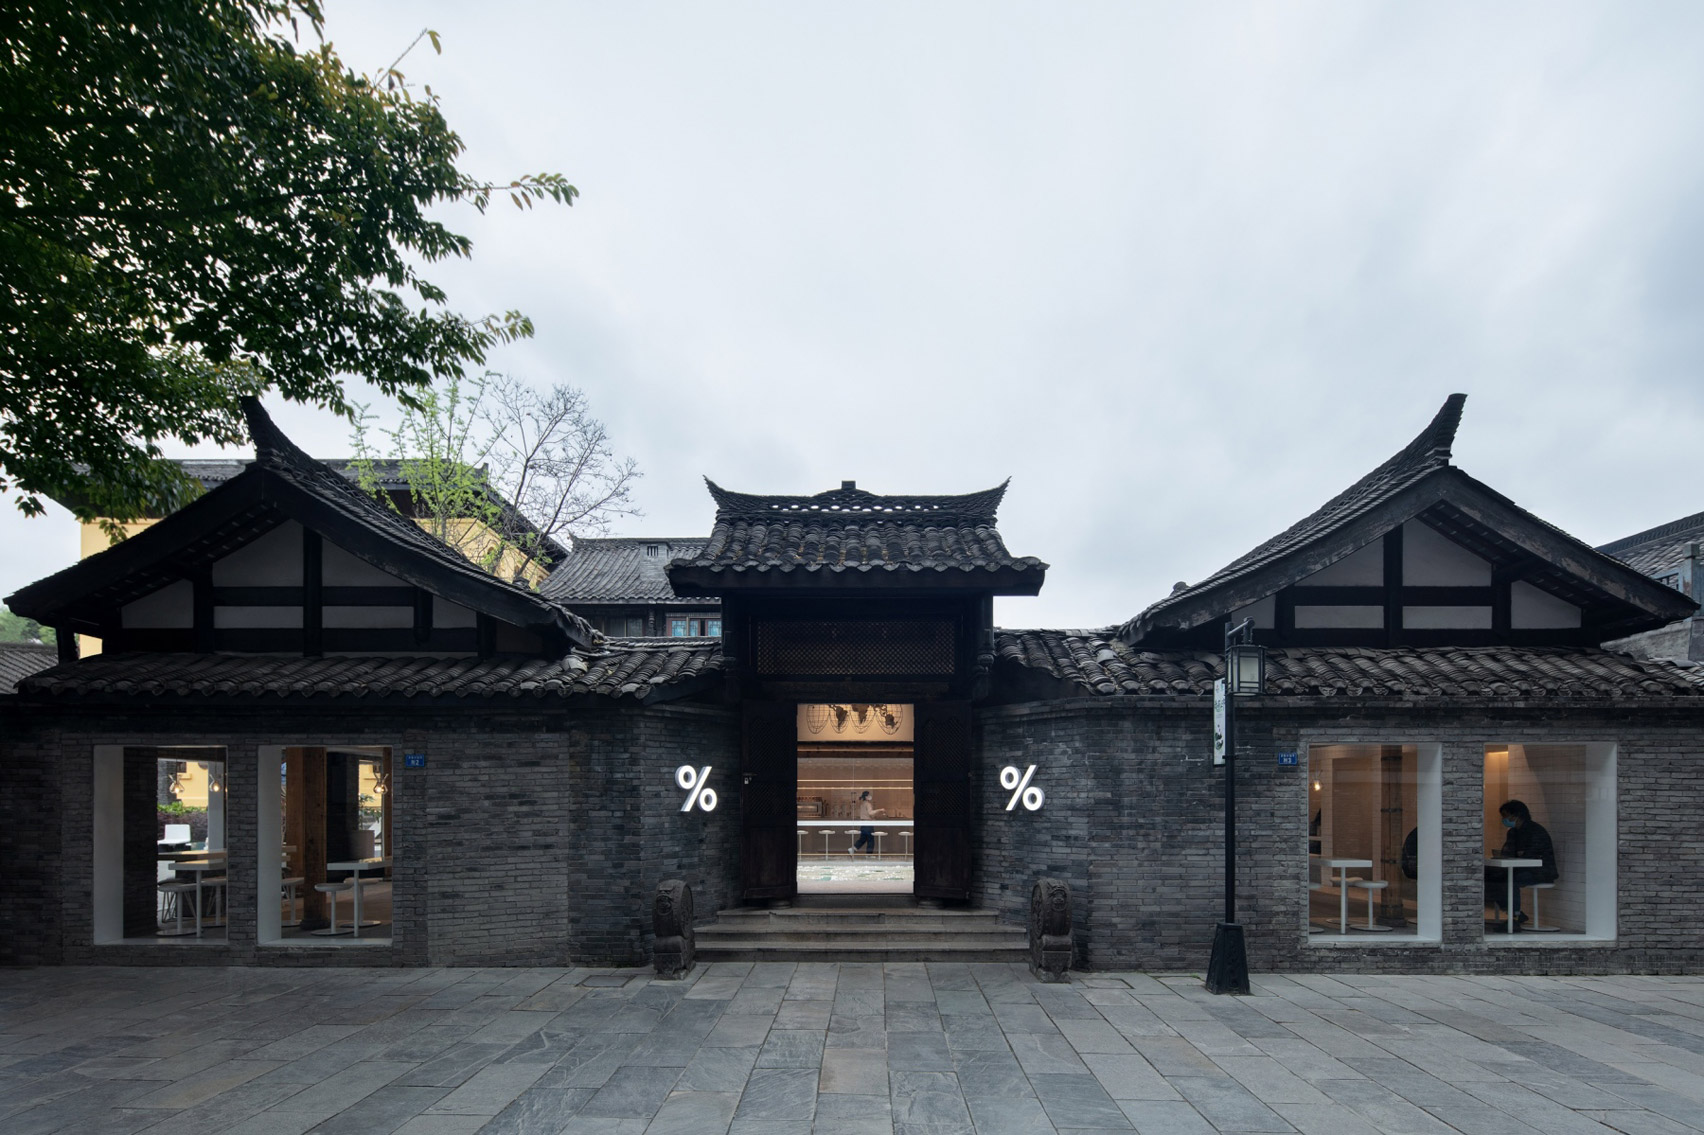 Exterior of % Arabica coffee shop in Chengdy with traditional Chinese roofs